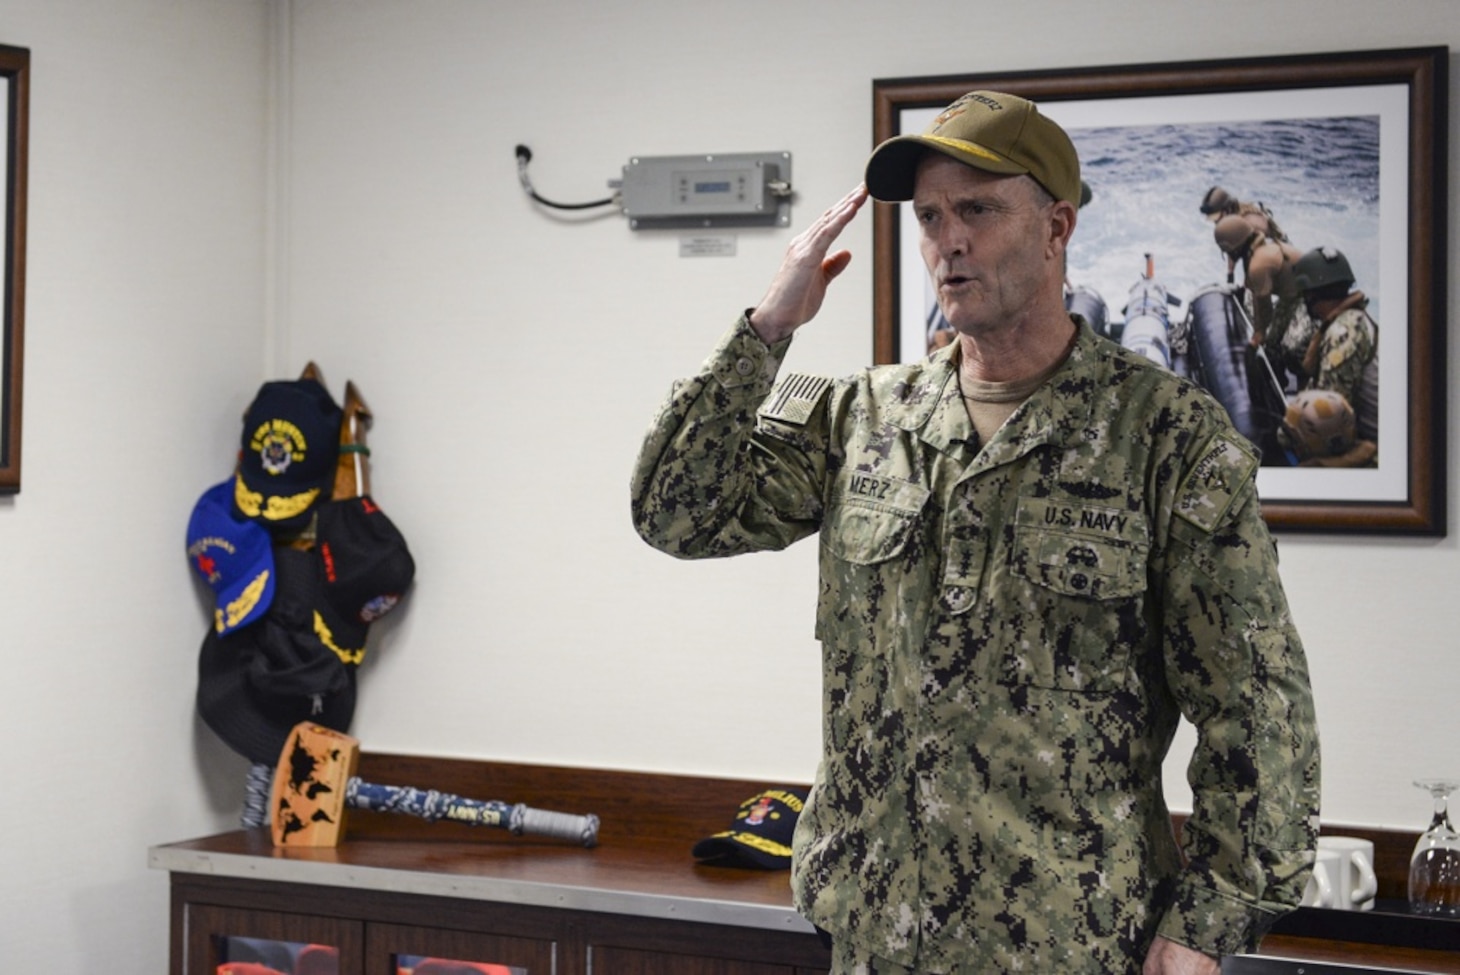 YOKOSUKA, Japan (Oct. 2, 2020) Vice Adm. Bill Merz, commander, U.S. 7th Fleet, presides over the change of command ceremony of commander, Task Force (CTF) 75 through video teleconference aboard the forward-deployed U.S. 7th Fleet flagship USS Blue Ridge (LCC 19). CTF 75 is 7th Fleet's primary expeditionary task force and is responsible for the planning and execution of maritime security operations, explosive ordnance disposal, diving, engineering and construction, and underwater construction.